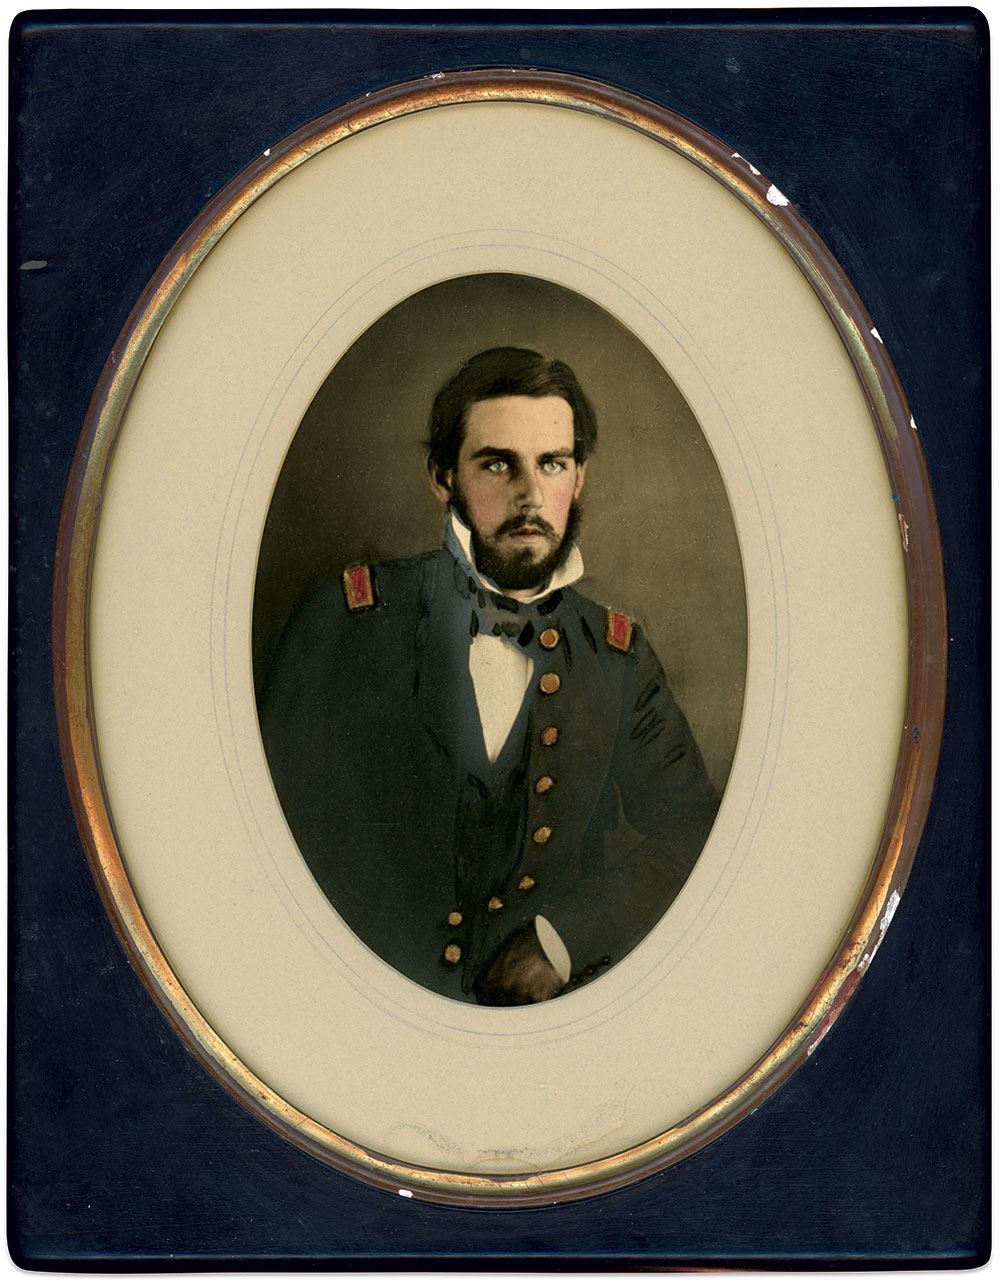 This circa 1854 portrait of Huse as a U.S. artillery second lieutenant is a French-made albumen print copied from an original hard plate.